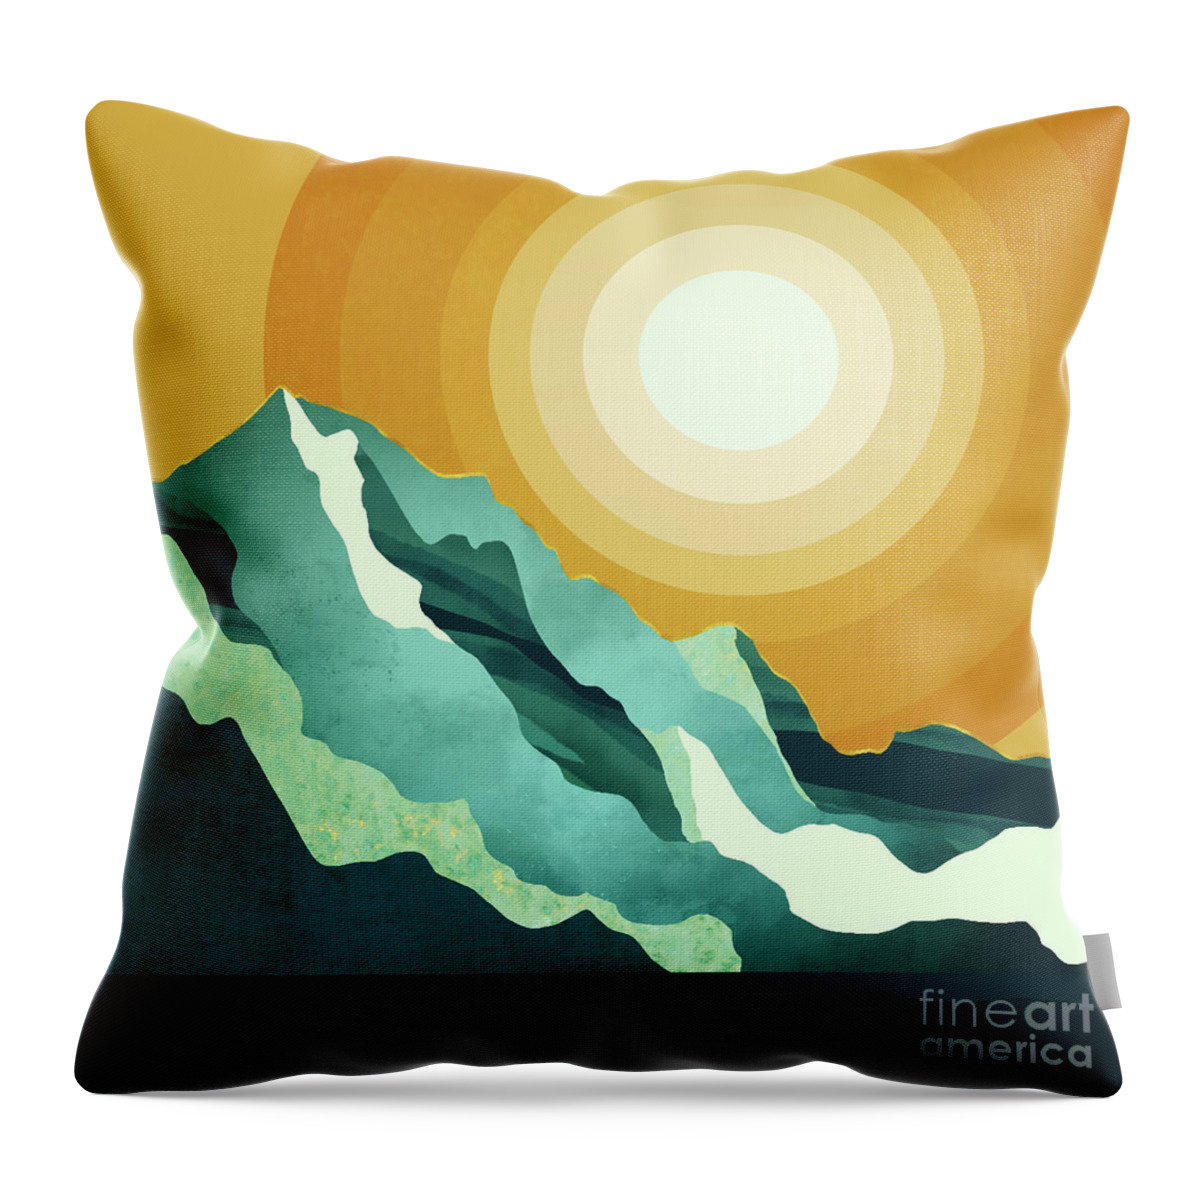 Retro Throw Pillow featuring the digital art Retro Mountain Sunset by Spacefrog Designs